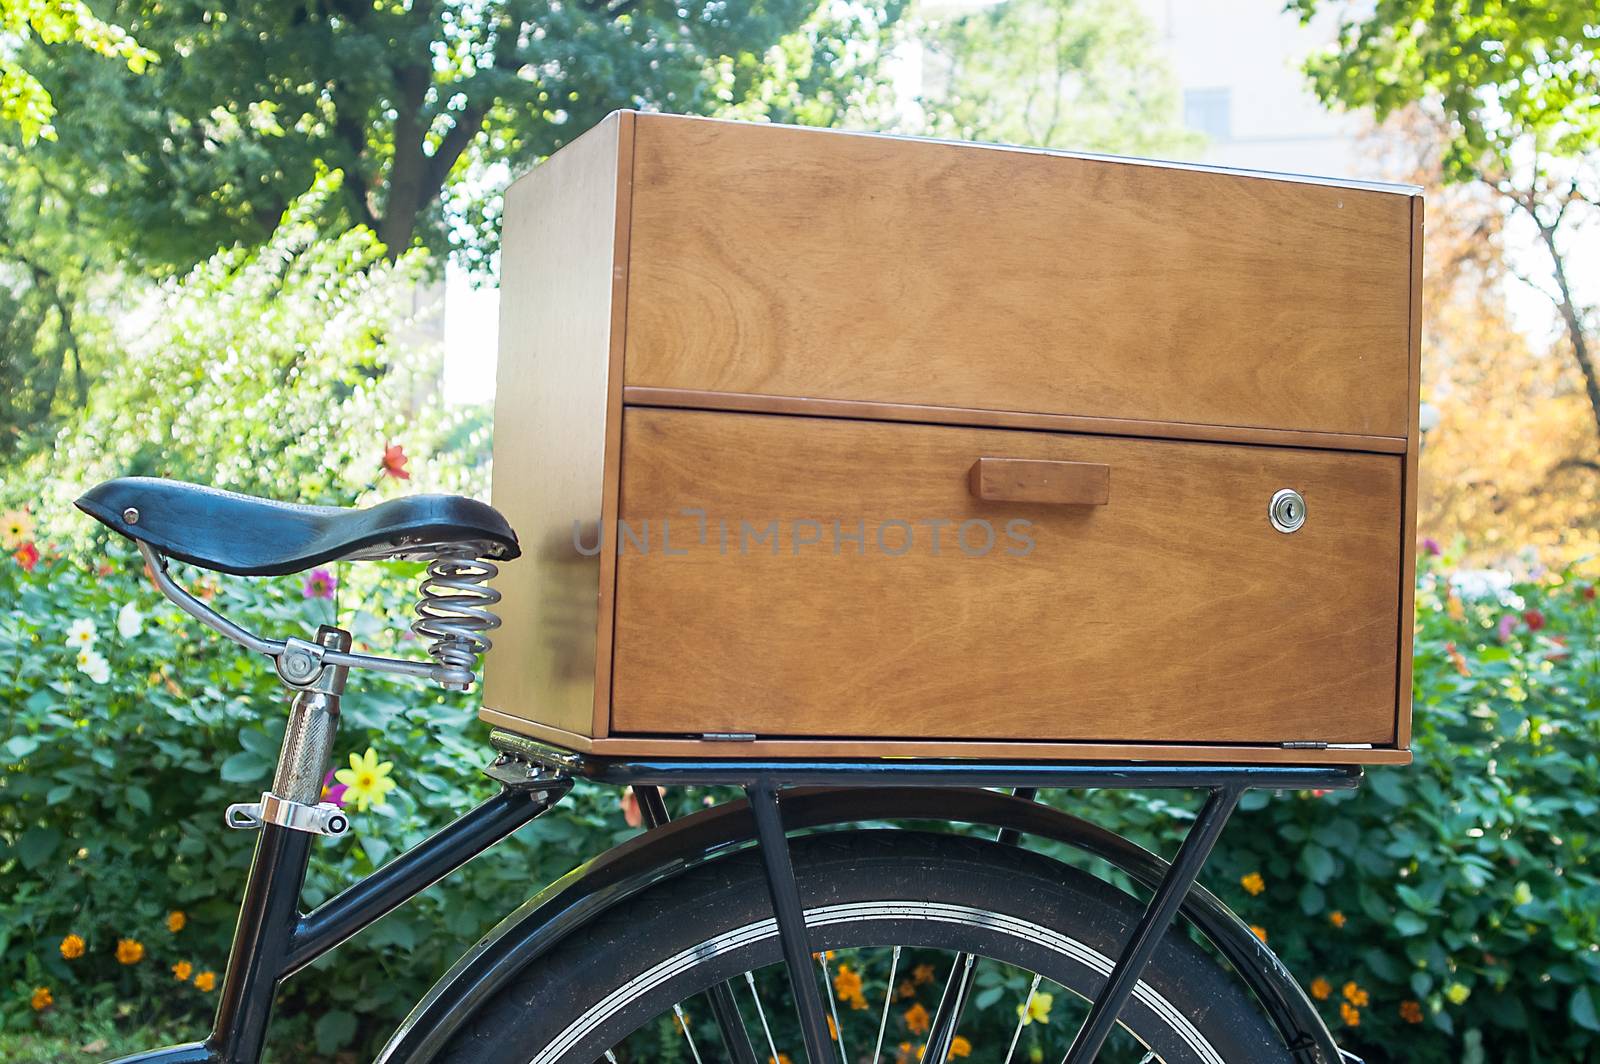 Self is a good bike with wooden box